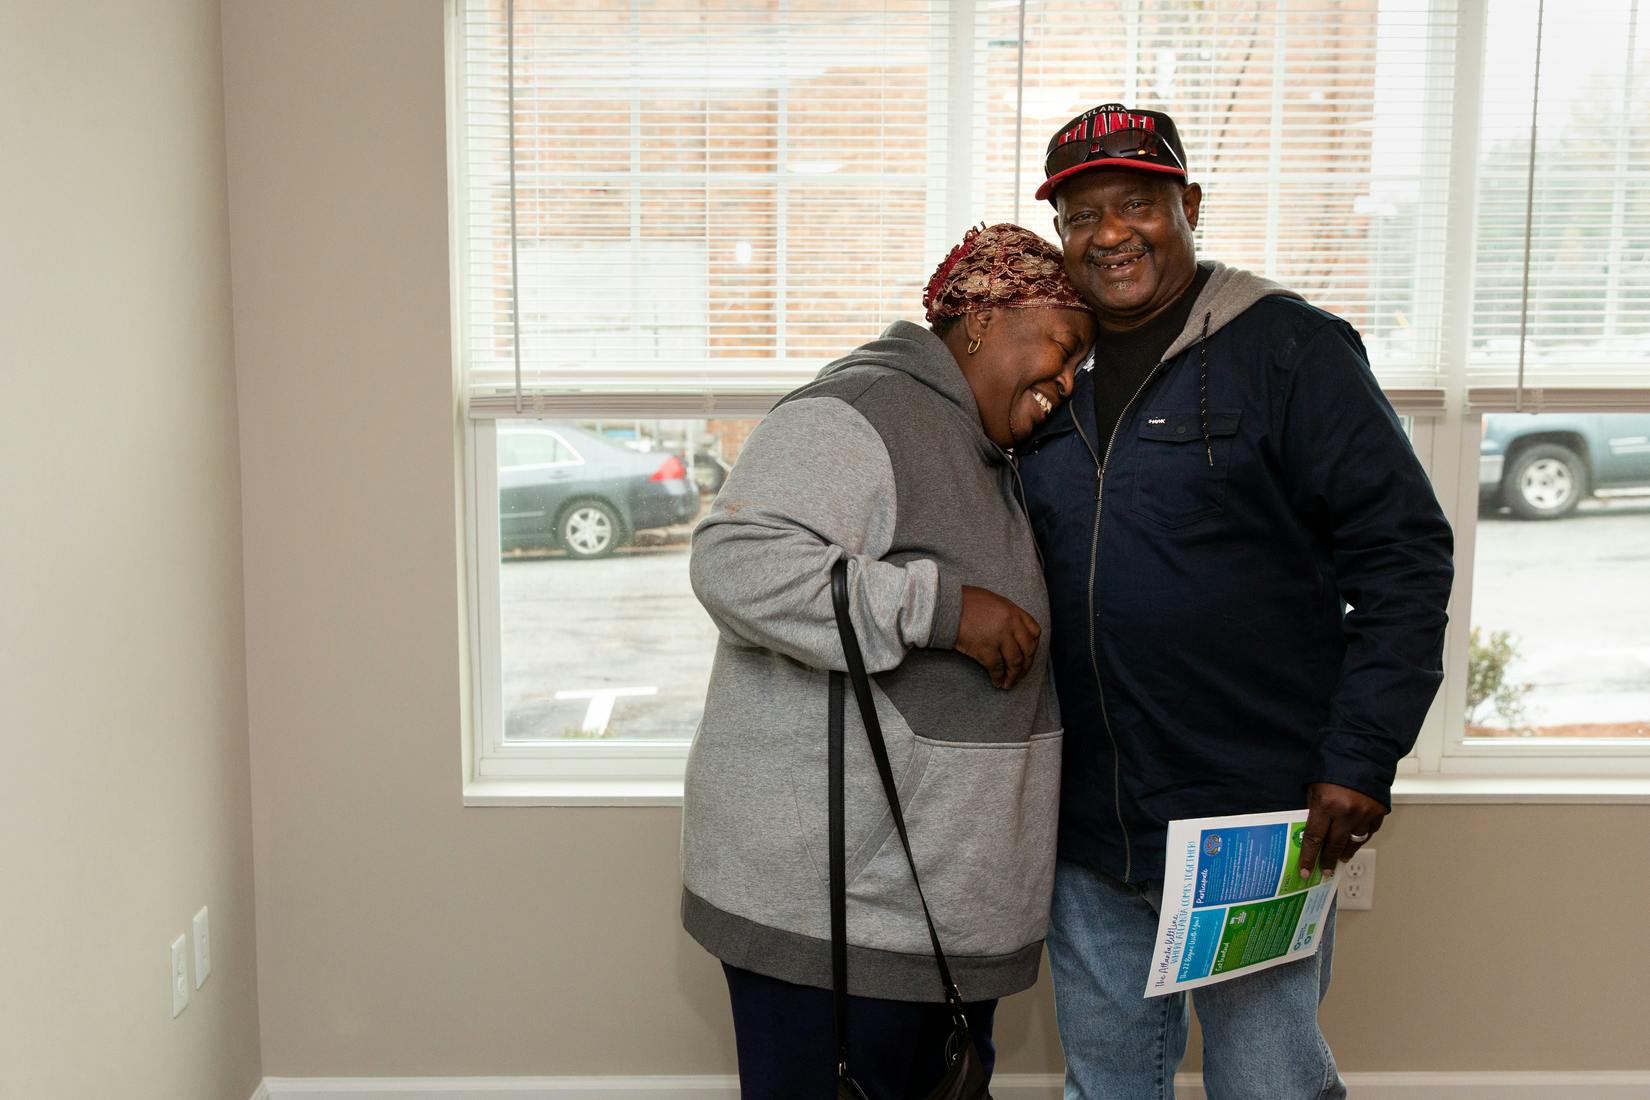 A happy couple celebrates their new home in Adair Court Apartments. Photo by Erin Sintos.